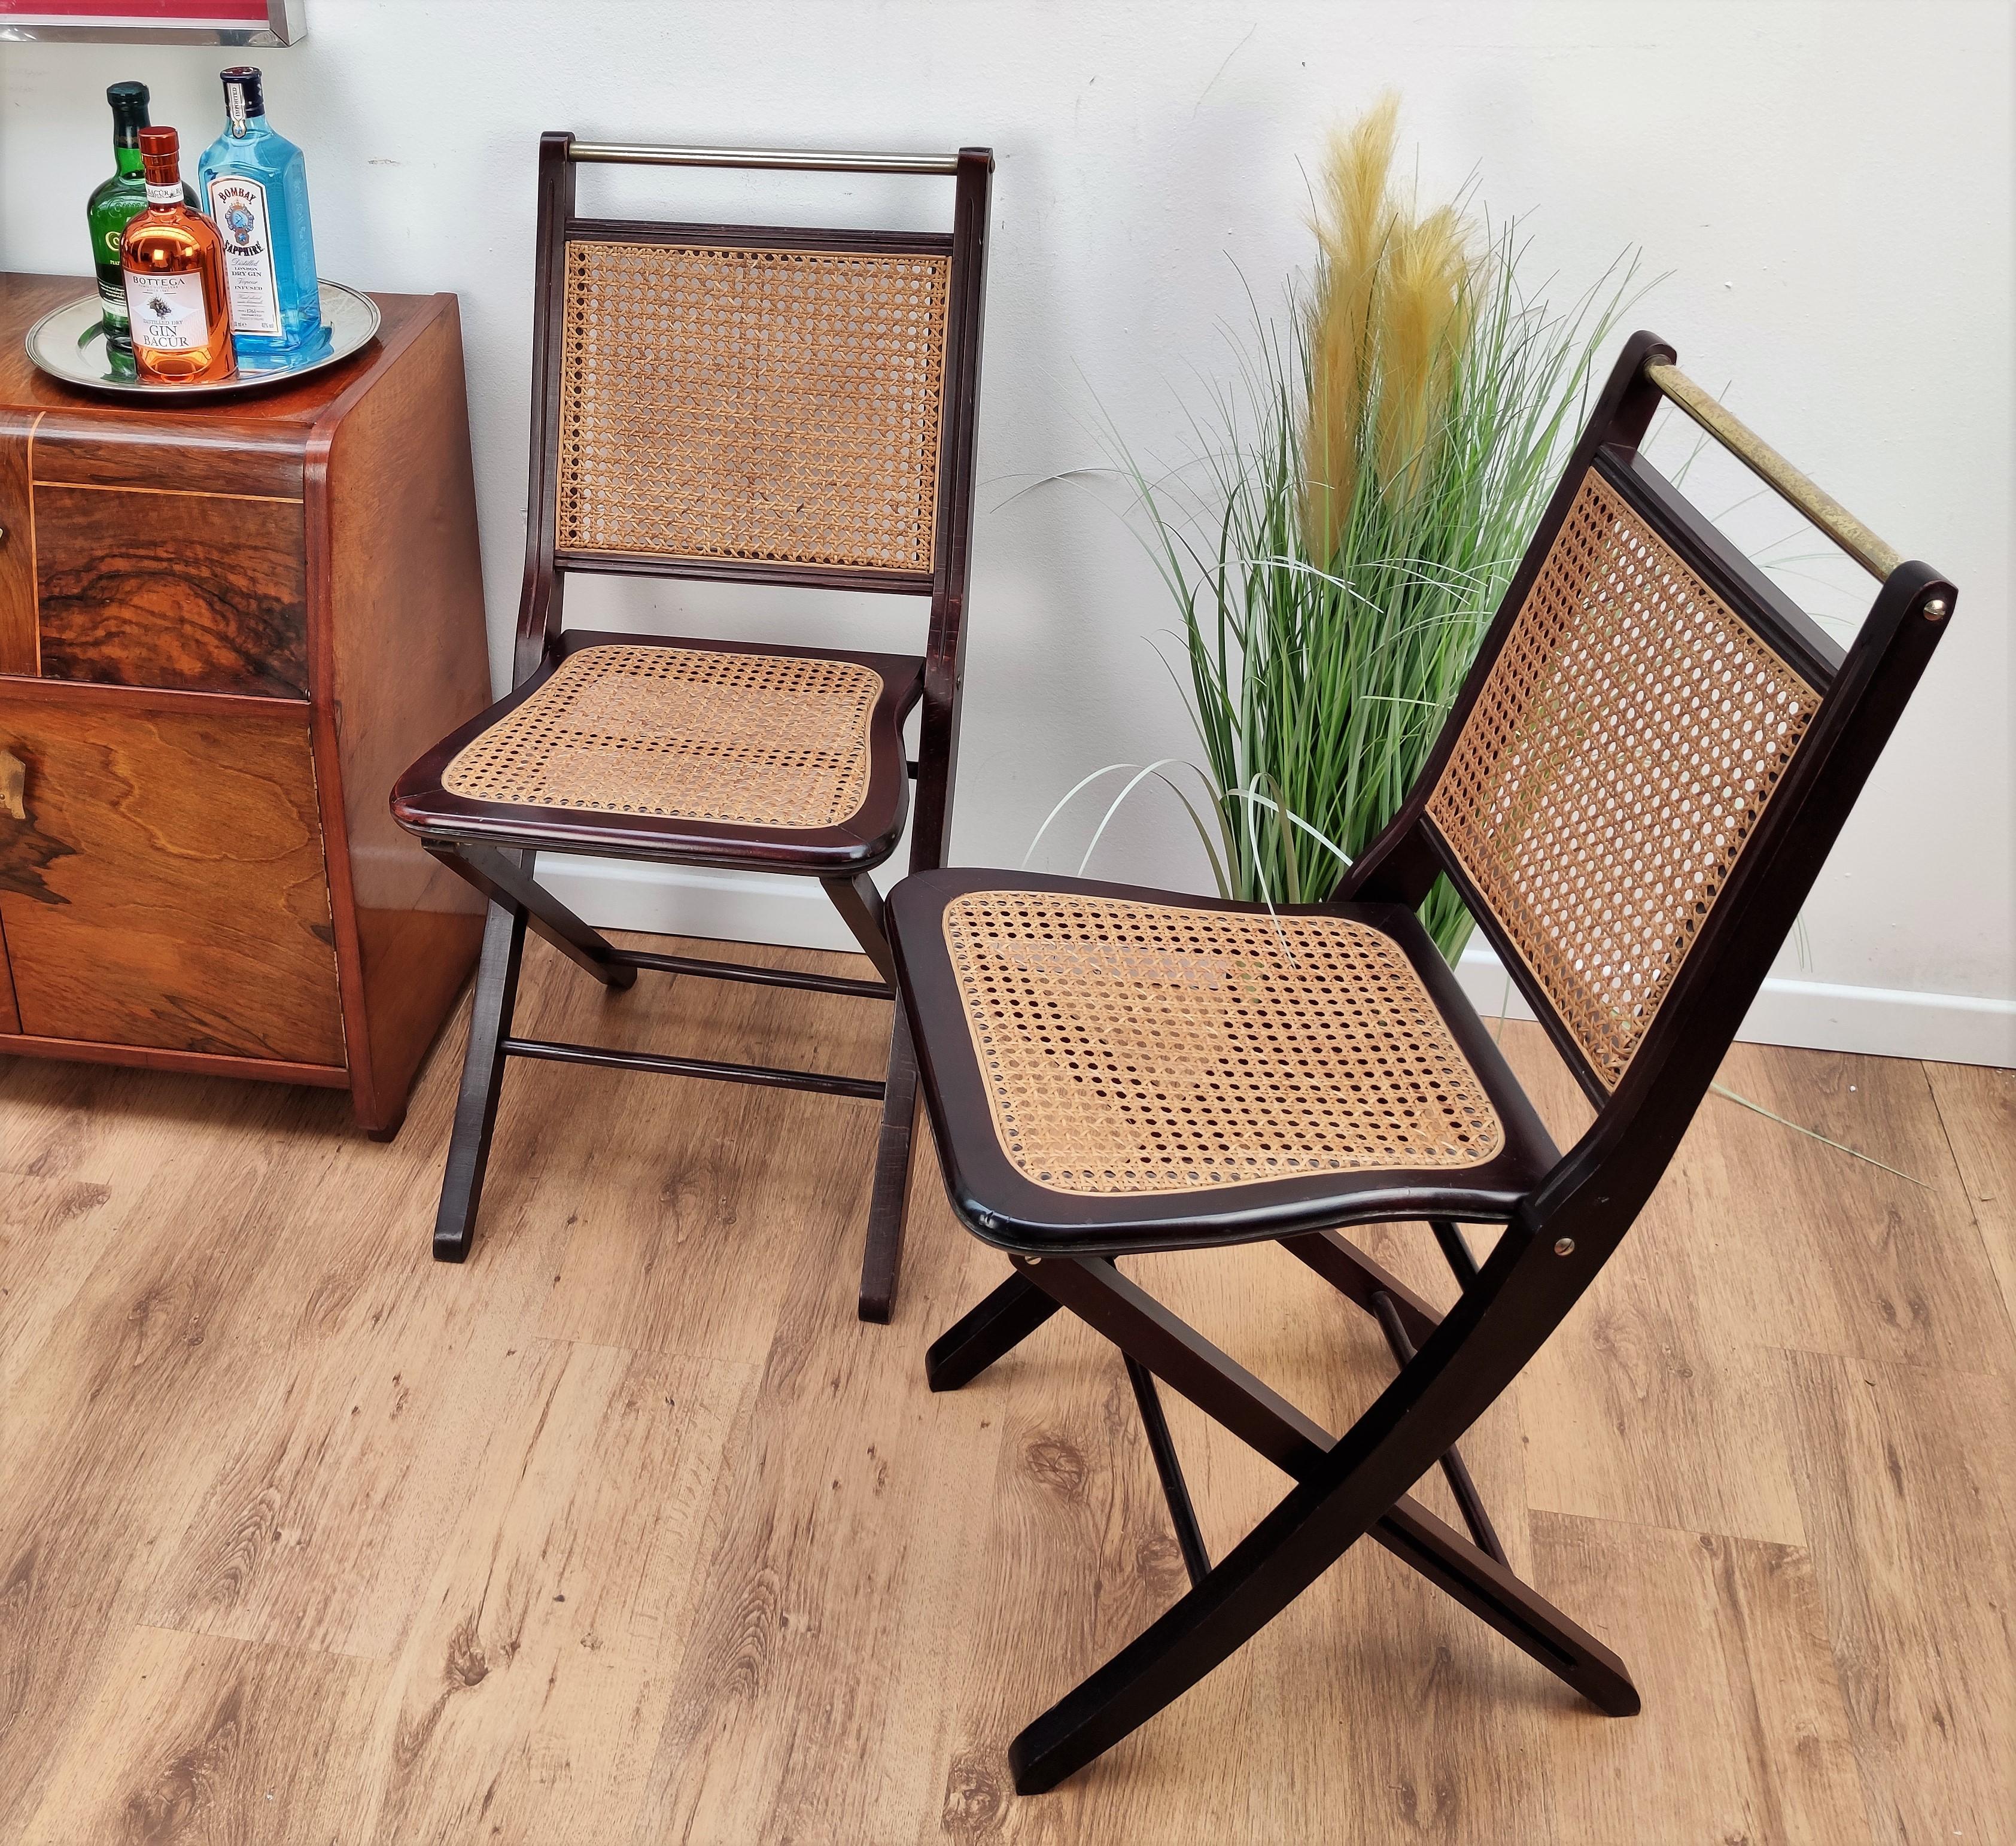 Beautiful pair of Italian midcentury foldable chairs in a solid wood frame structure with brass details and rattan or wicker caned on the nicely shaped seating as well as on the back. In good conditions, ideal as elegant and catchy extra chairs.